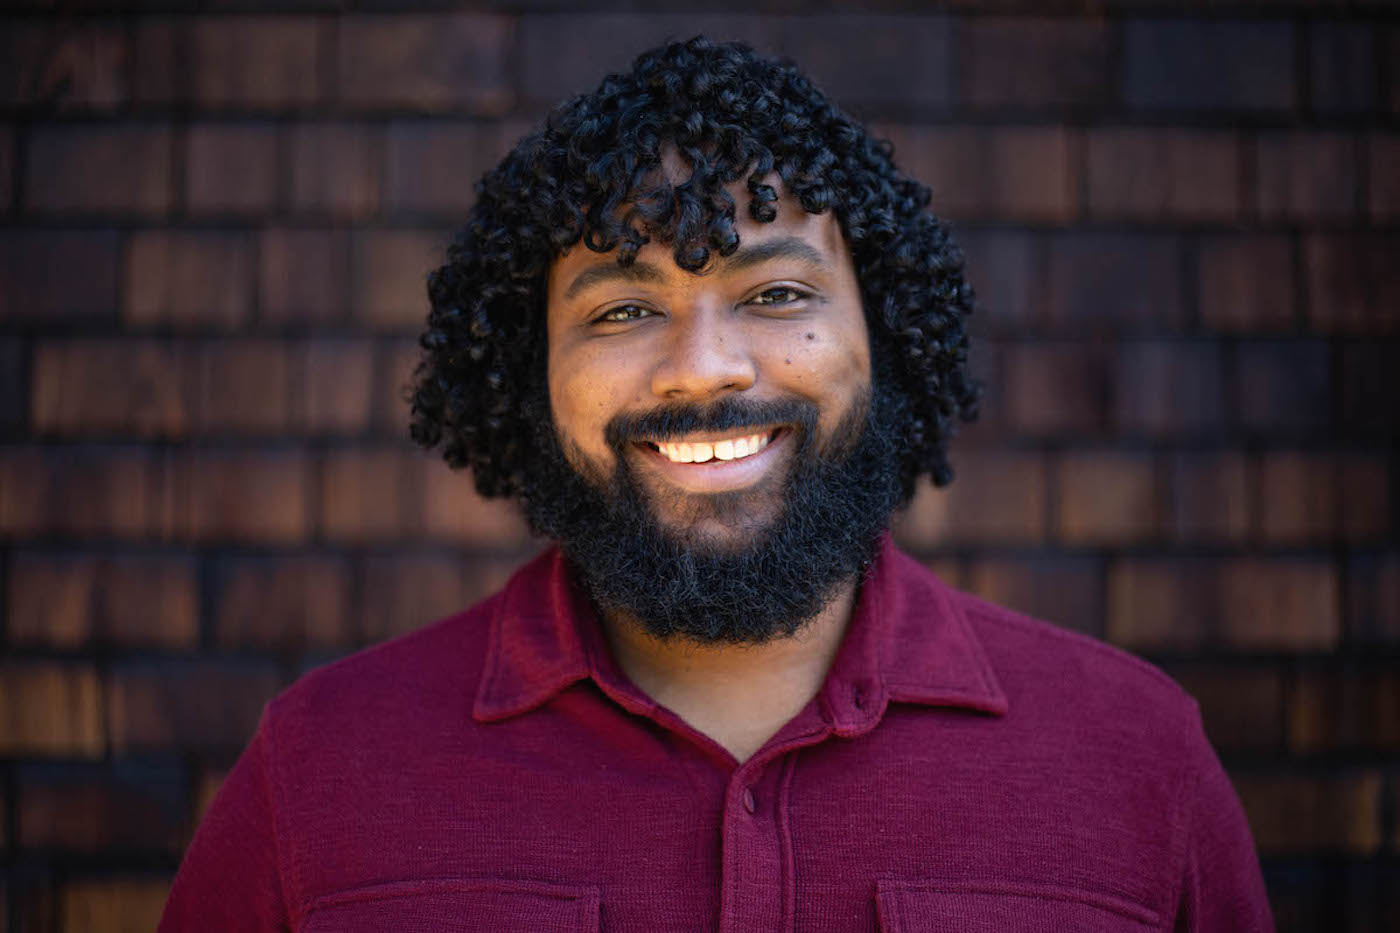 A person with curly hair and a beard smiles warmly at the camera. Wearing a red shirt and standing in front of a dark brown, shingled wall, they exude the thoughtful charm often associated with Berkeley Journalism graduates.